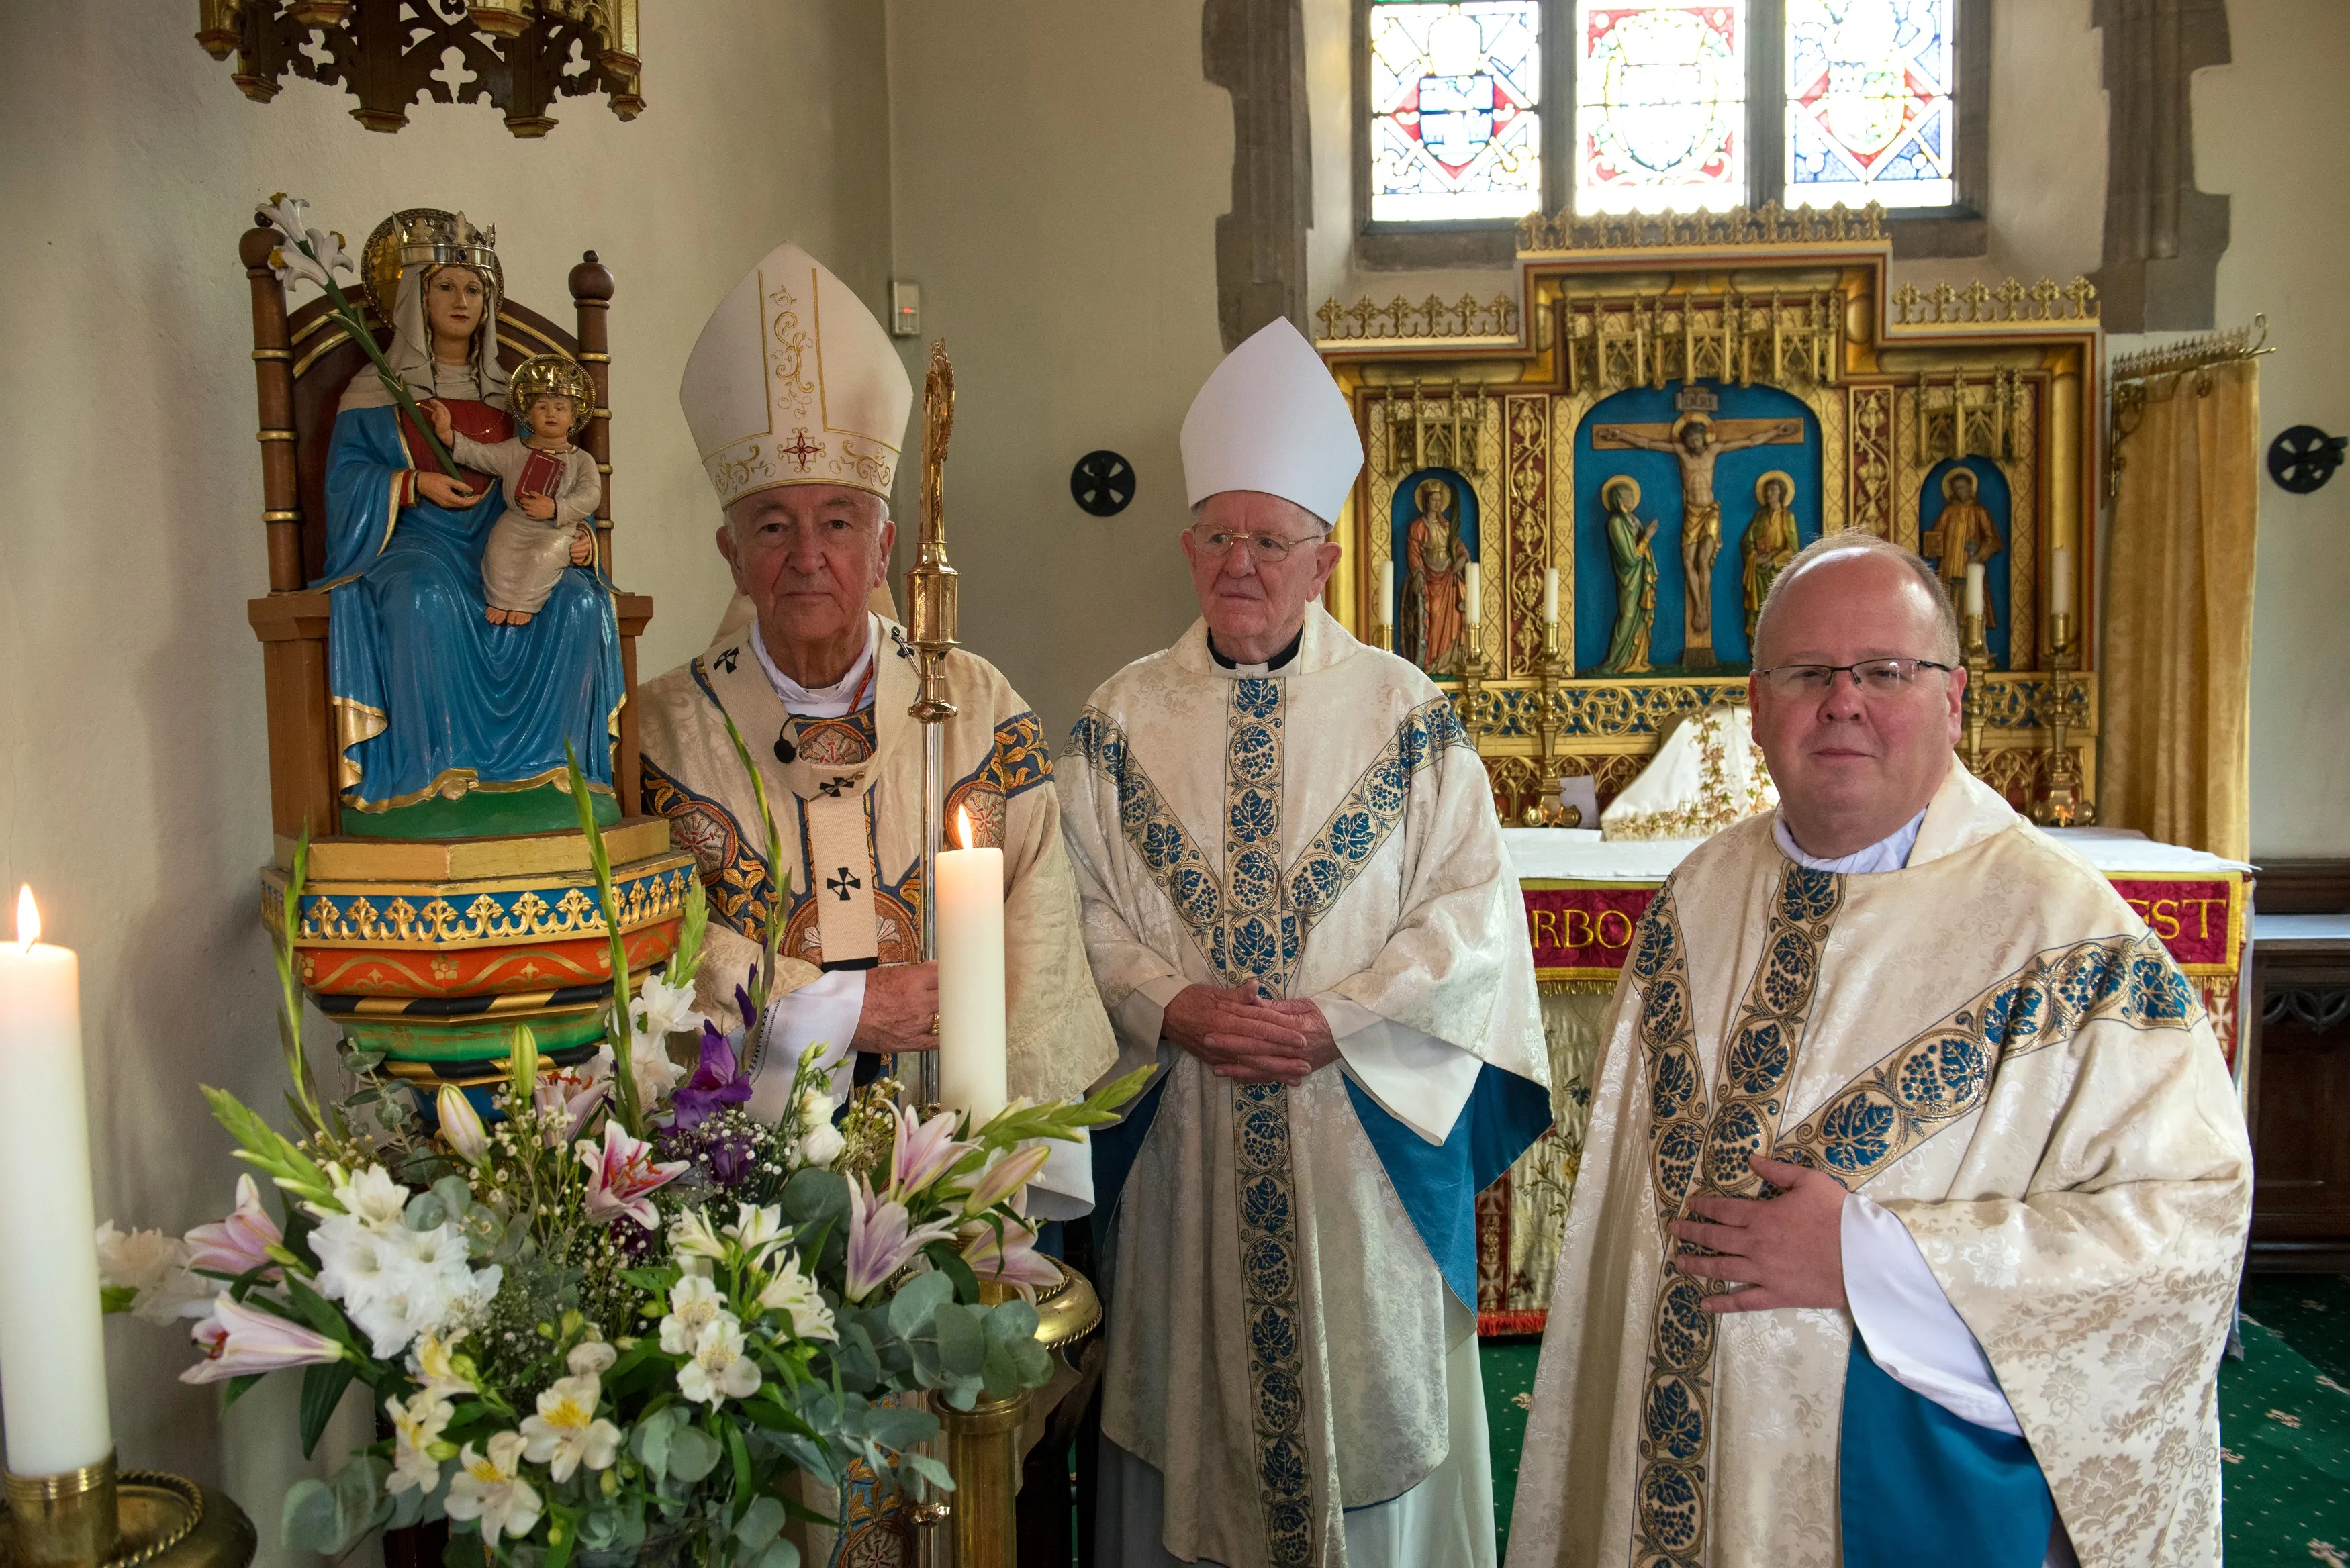 The new Rector Father Robert Billing with Cardinal Vincent Nichols (Archbishop of Westminster and the Primate of England and Wales) and Bishop Michael Campbell, OSA (Bishop Emeritus of Lancaster) in the Slipper Chapel on the occasion of Archdiocese of Westminster pilgrimage to Walsingham, the day before Father Billings' official induction as the new Rector. Sept 24, 2023. Credit: Marcin Mliczko